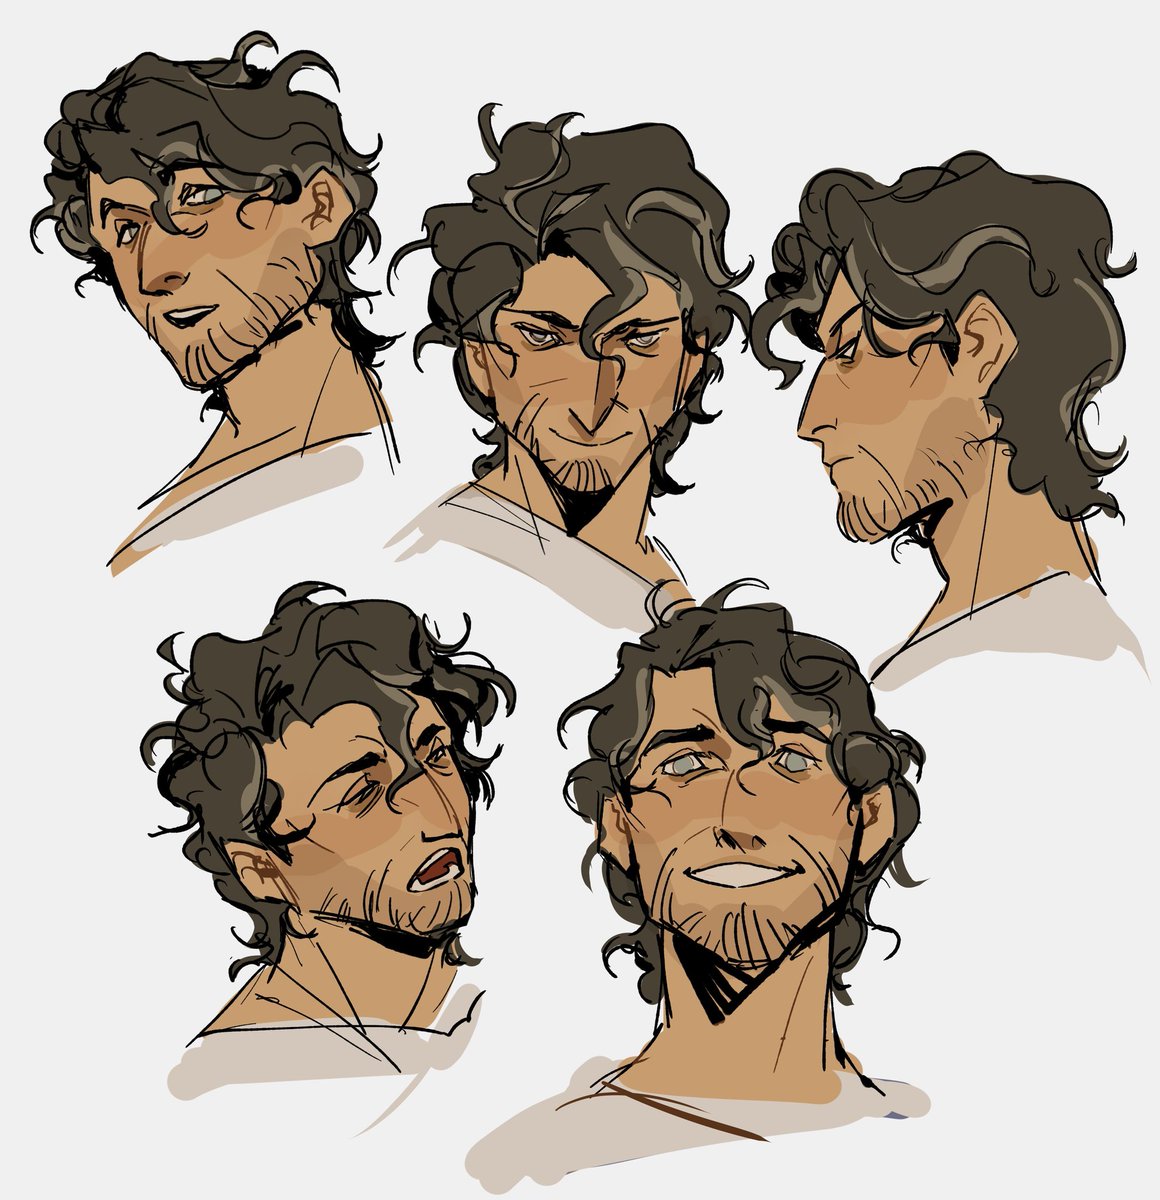 Reposting this expression sheet because I love him